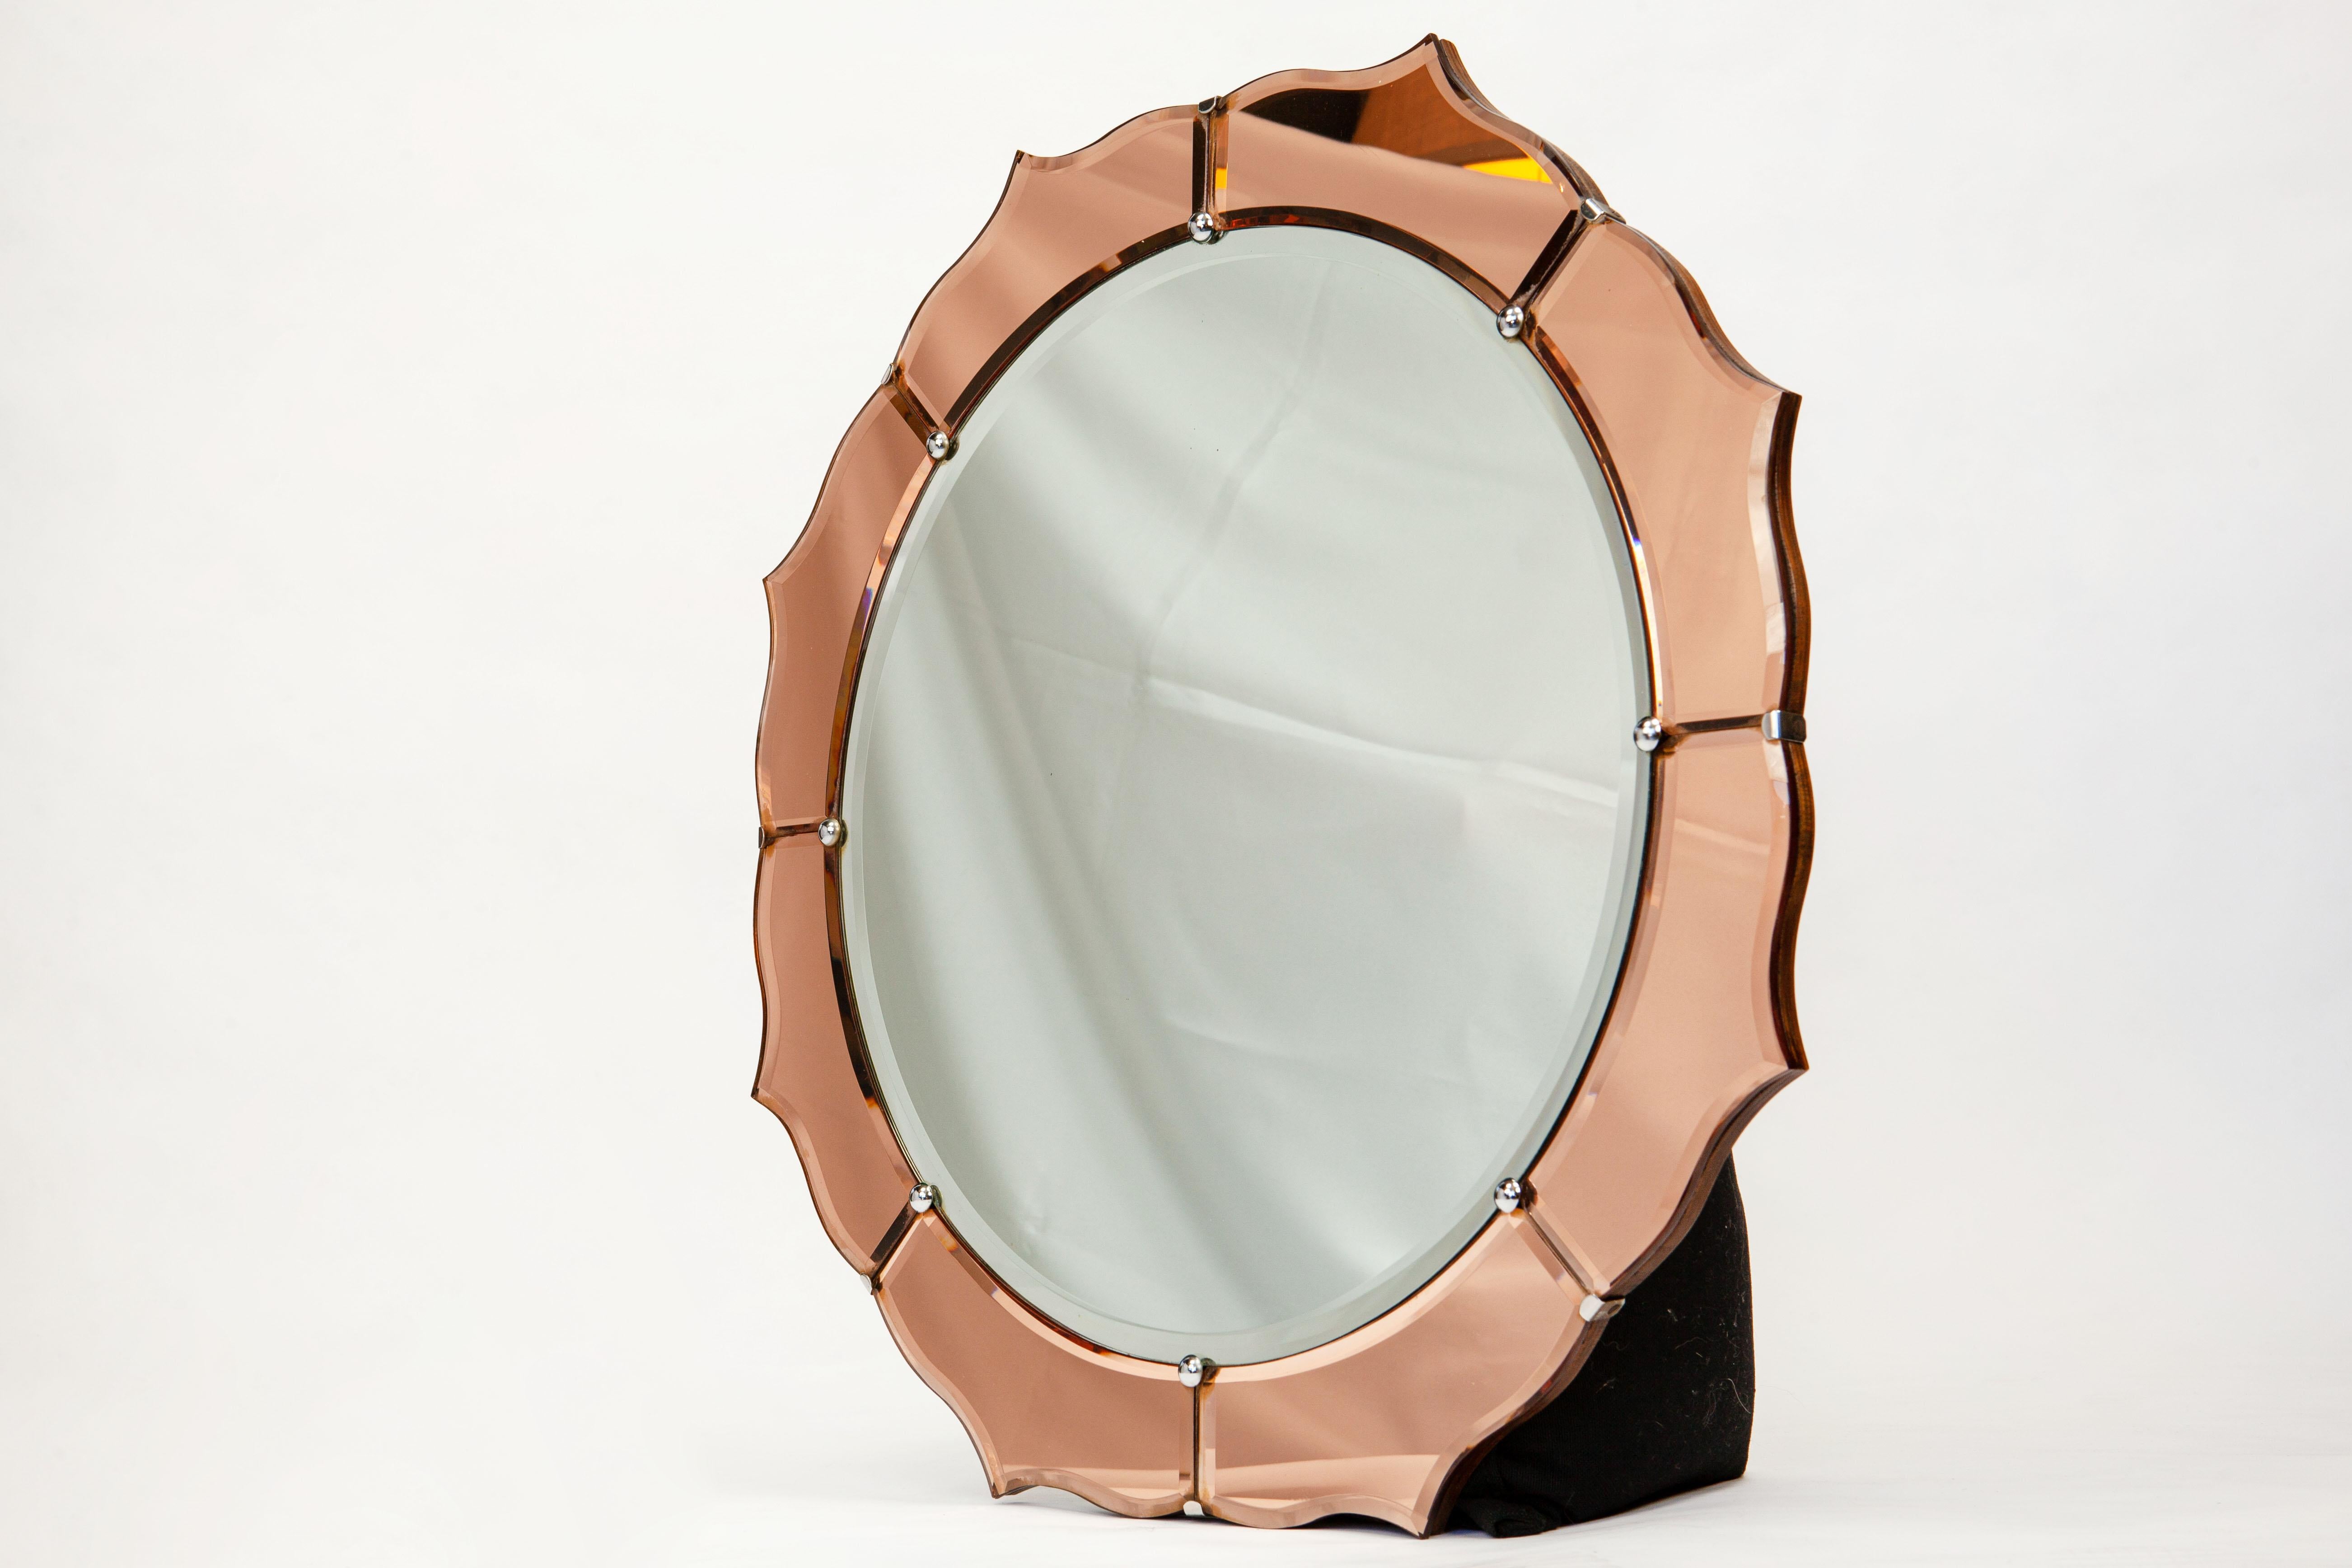 Antique two-tone English round mirror with beveled glass, wood back and chain hanger.